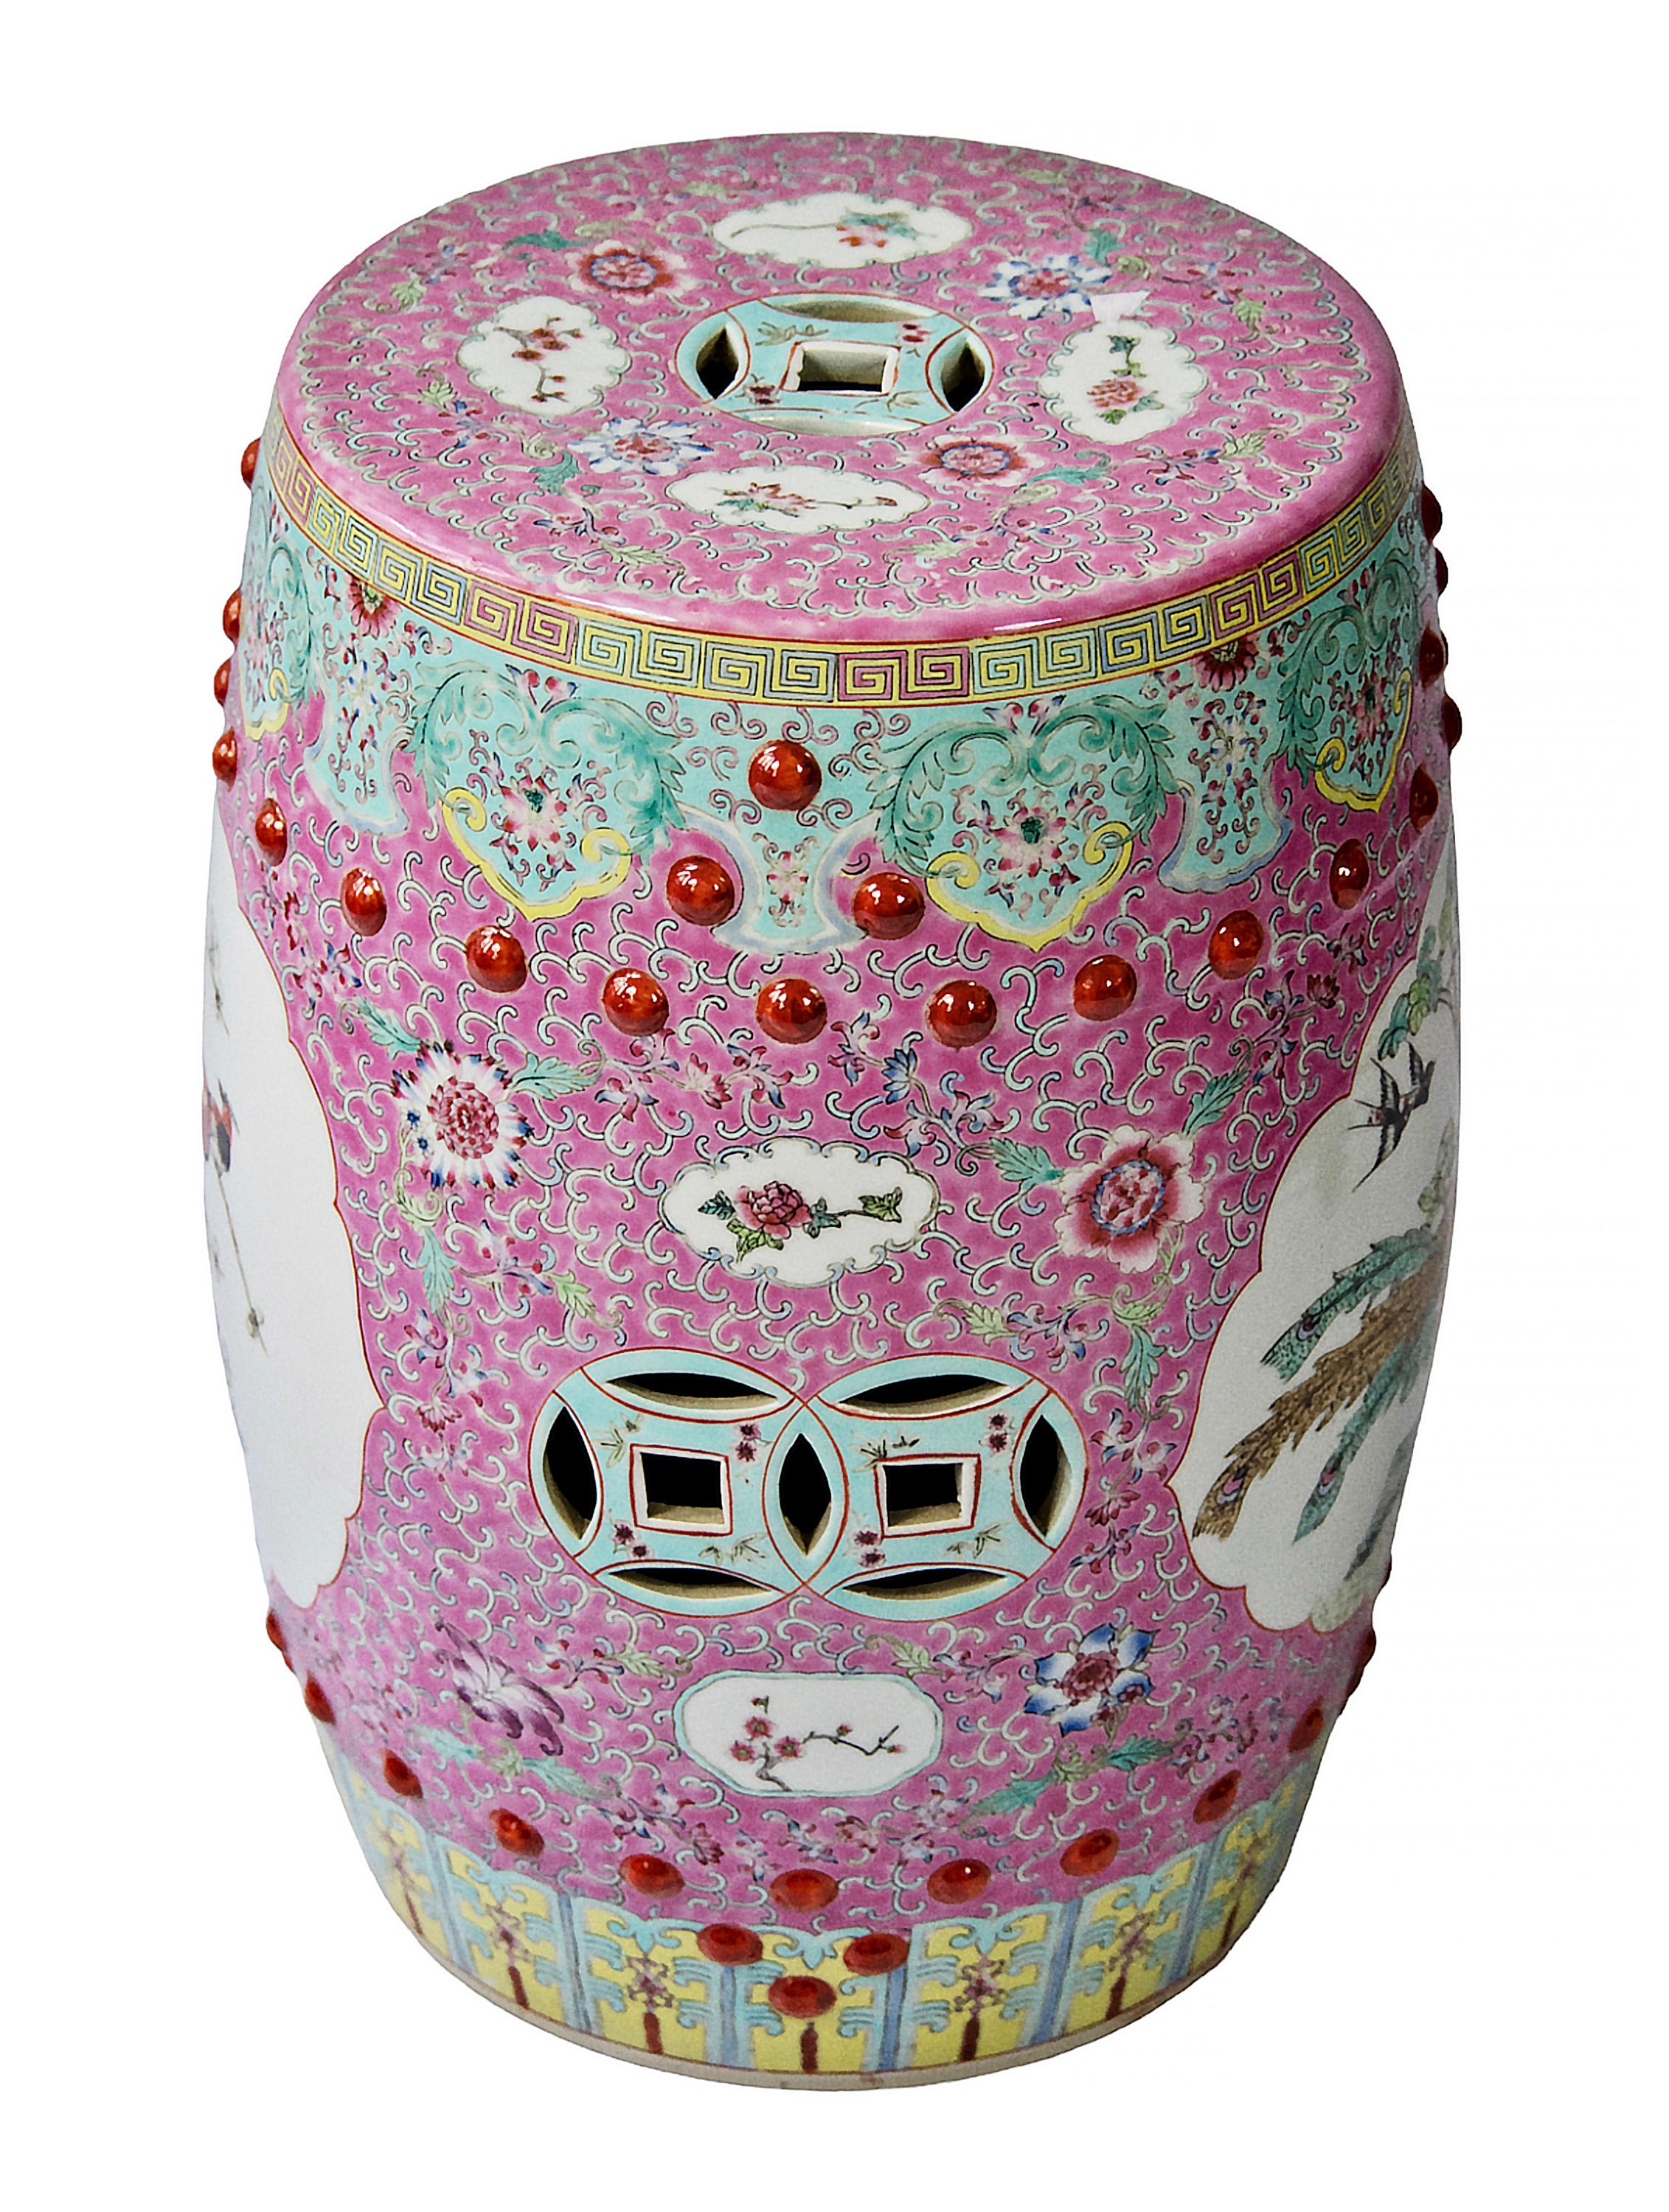 Chinese ceramic Famille Rose garden stool with openwork also with glazed circumferential decoration of the floral elements and birds.